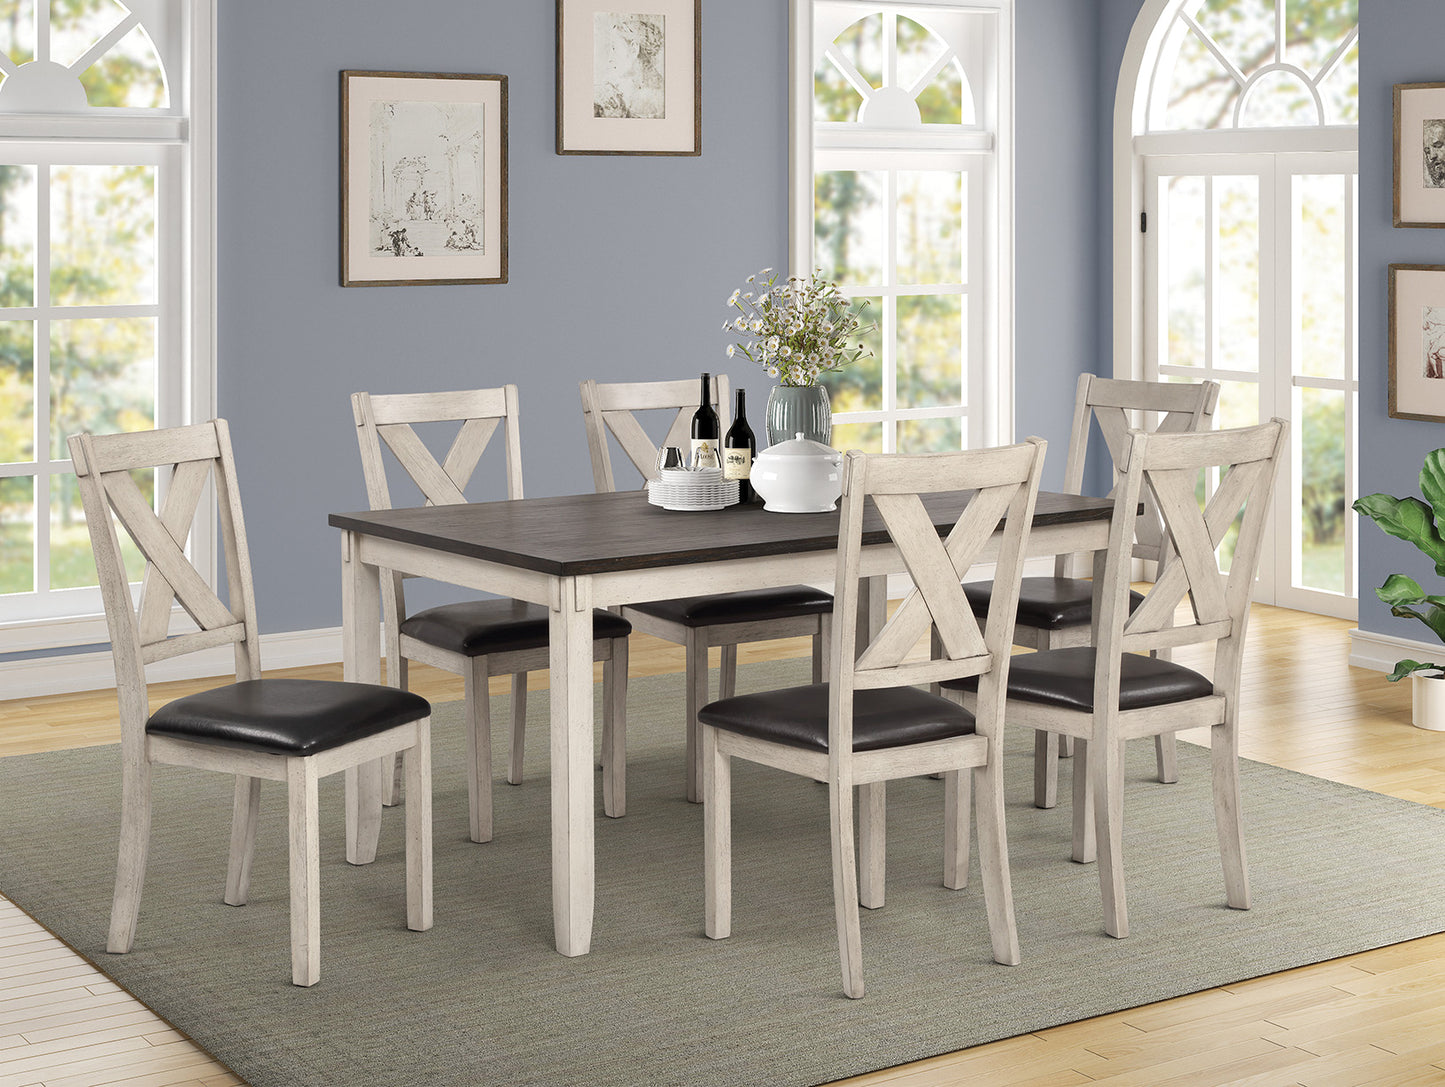 Rustic Dining Set for 6